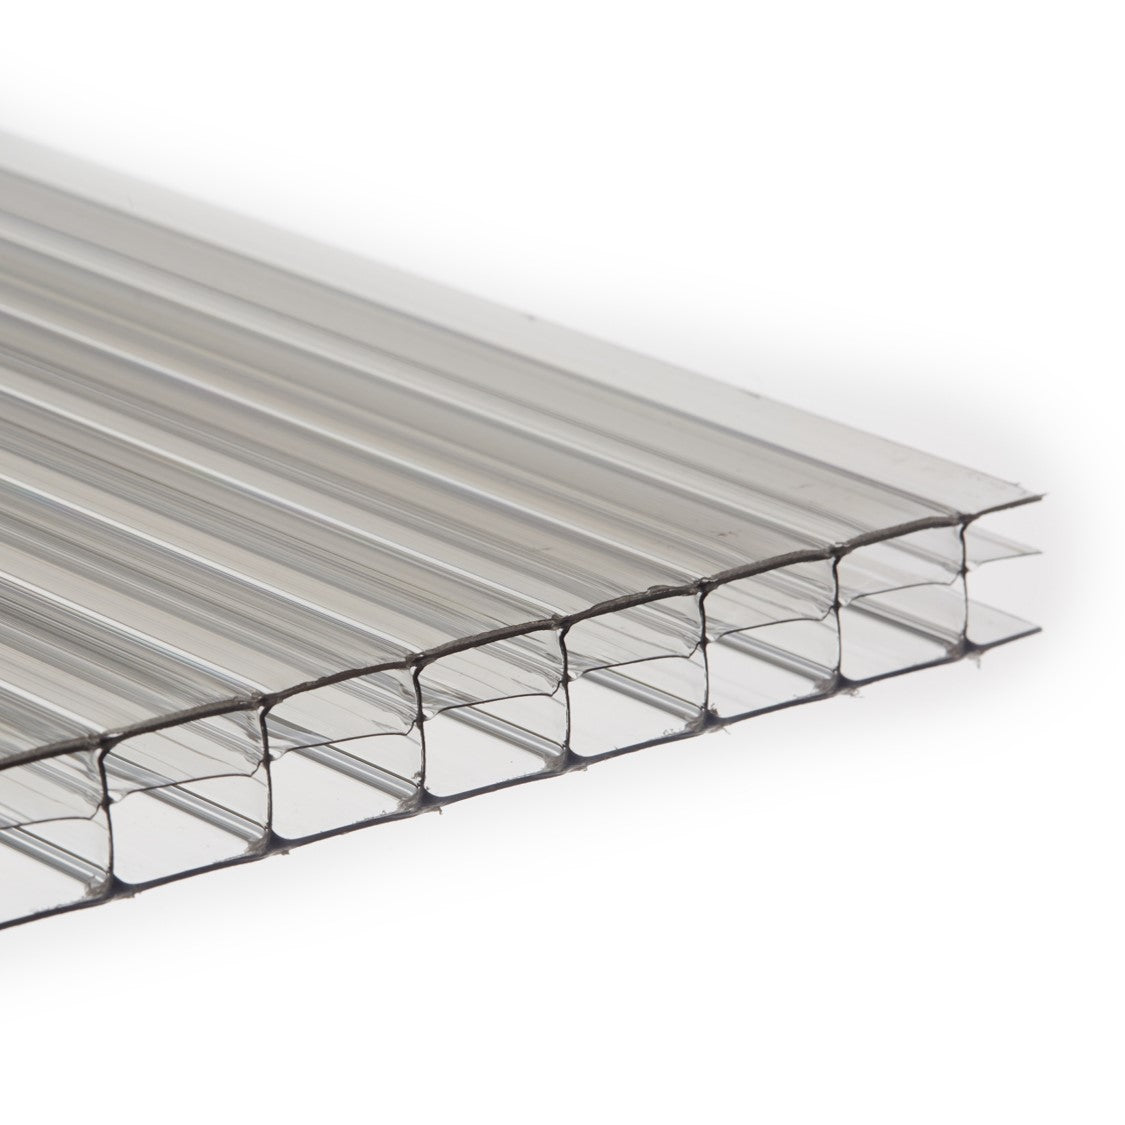 Advantages of Multiwall Polycarbonate Roofing Sheets